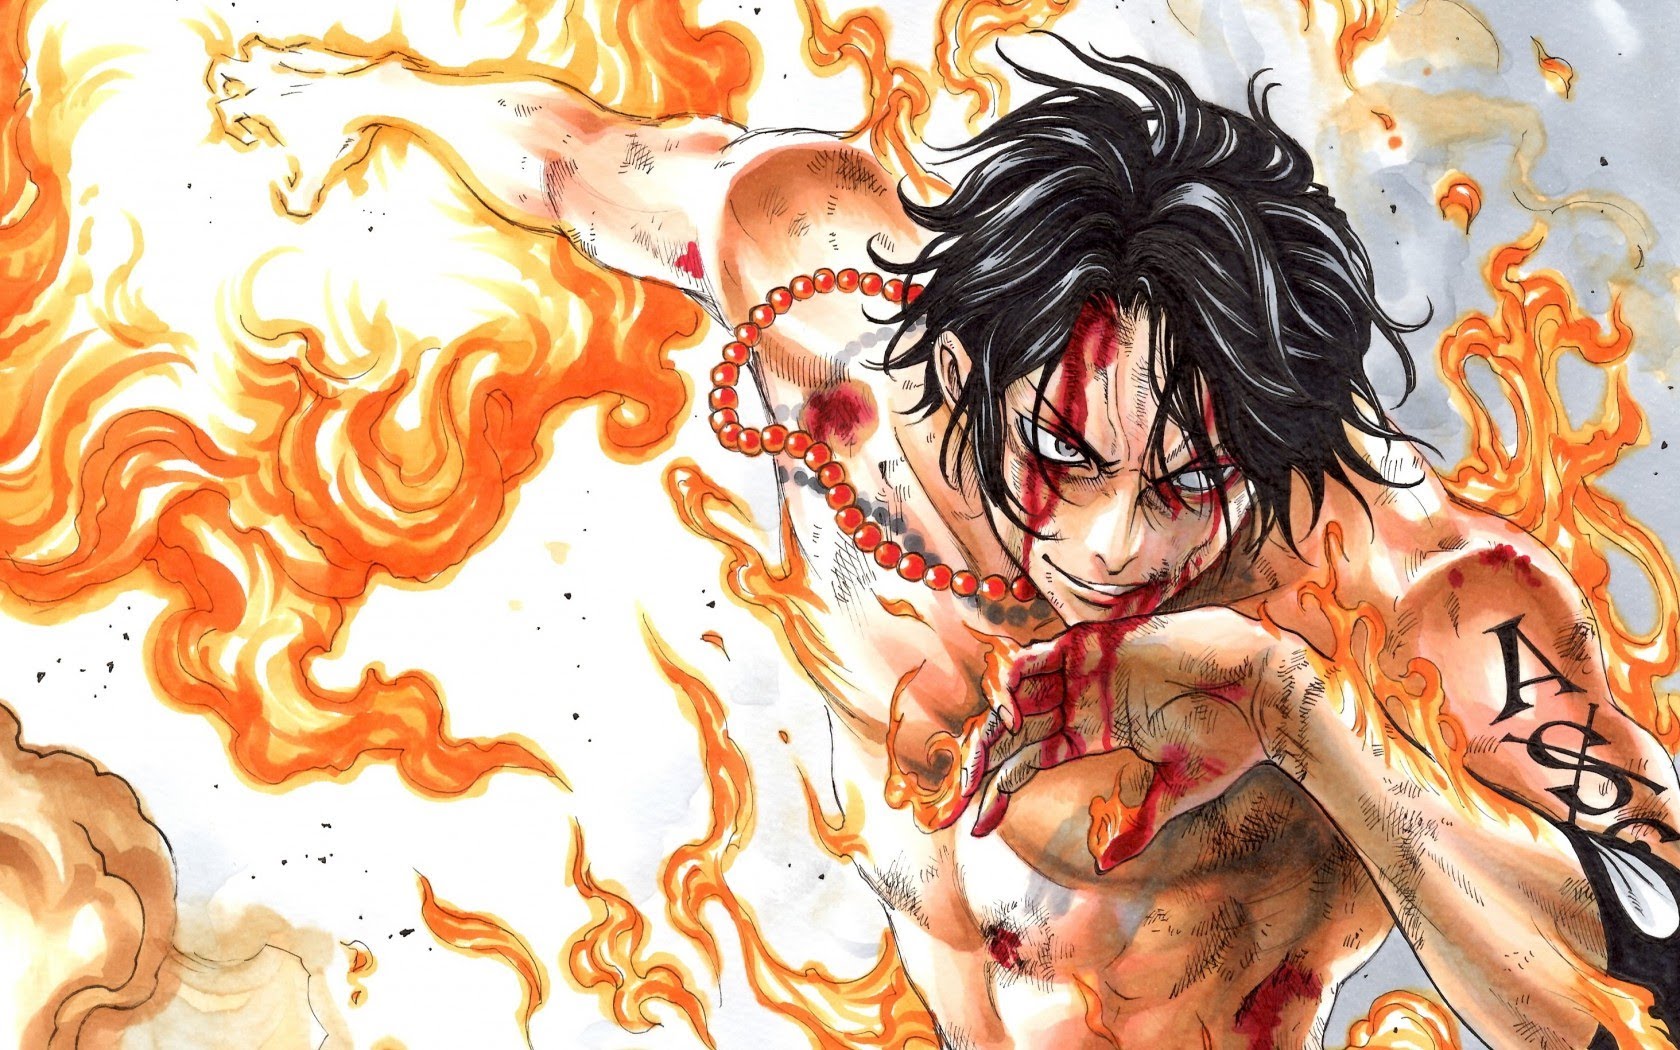 Anime Fire Images - Free Download on Freepik